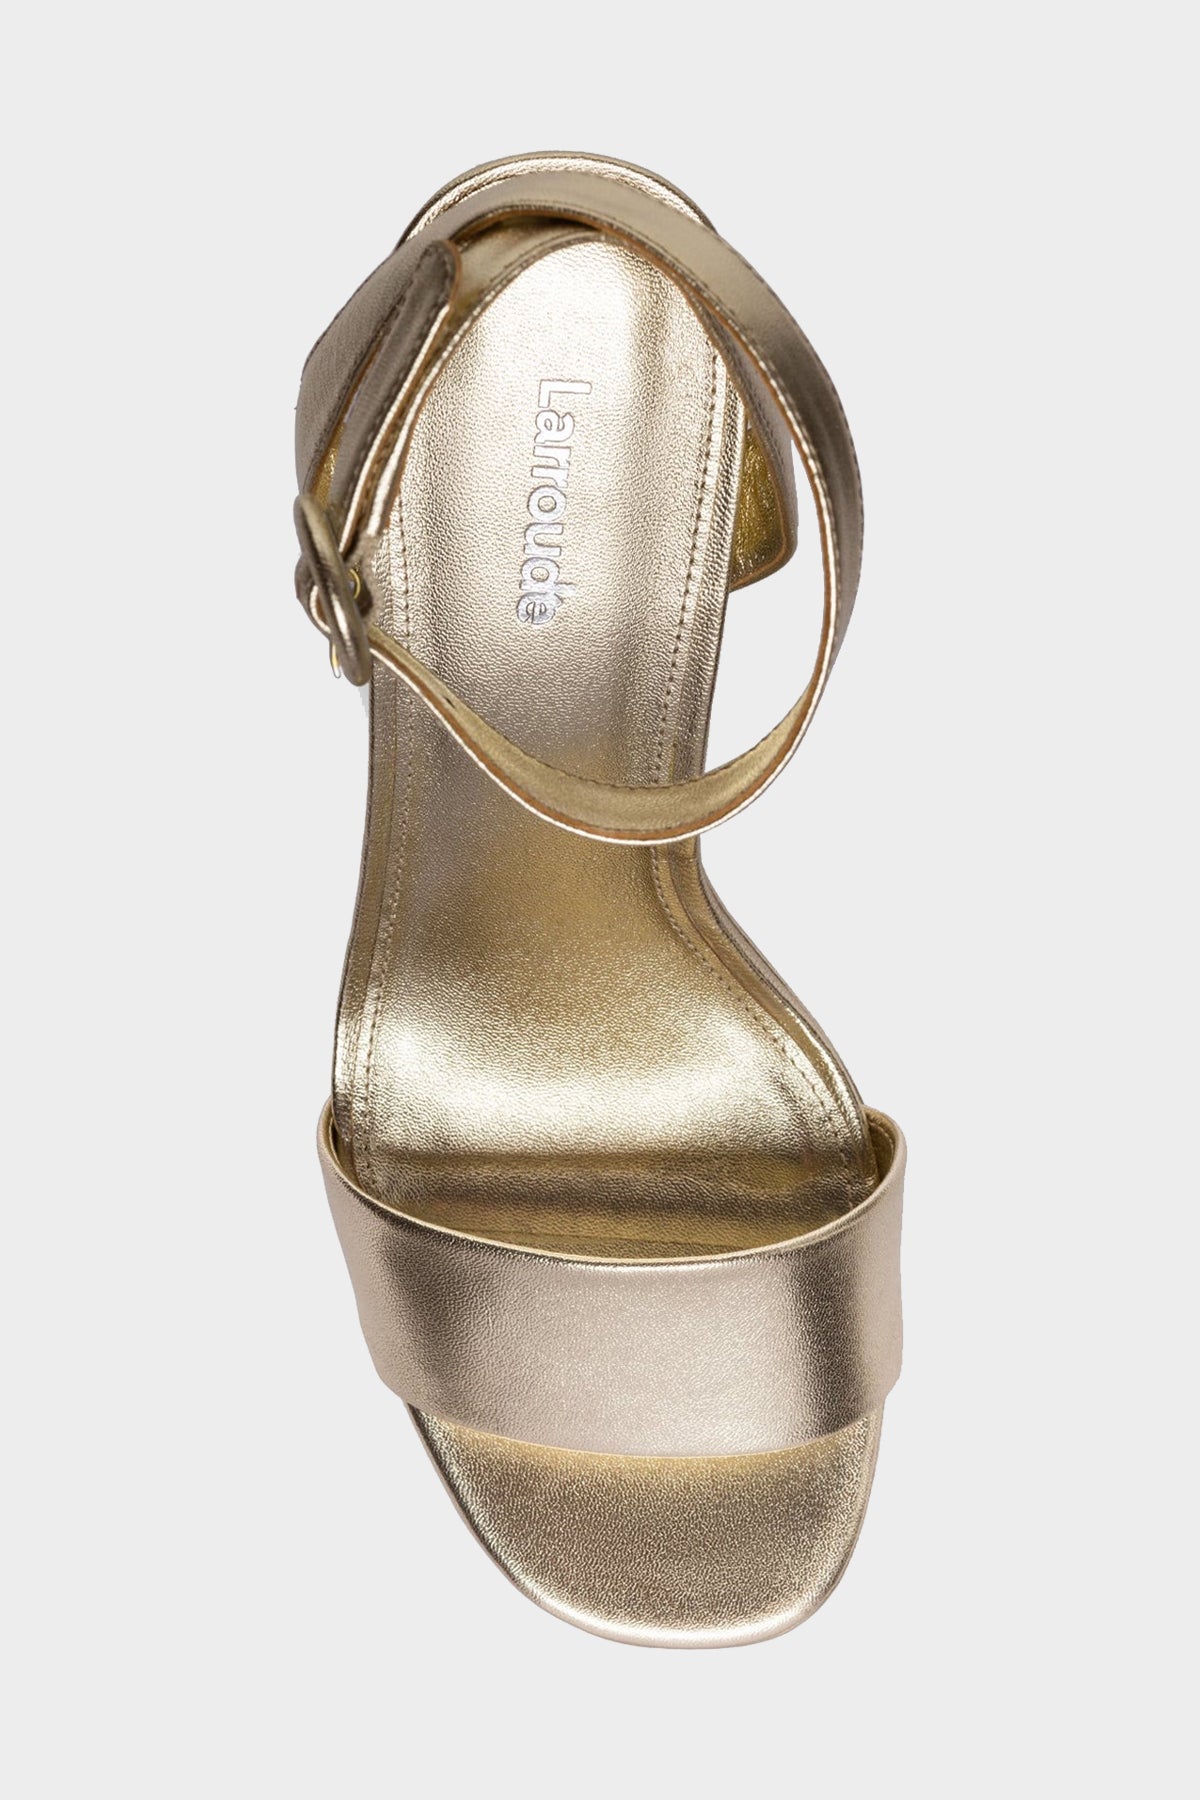 Dolly Sandal in Gold Metallic Leather - shop-olivia.com